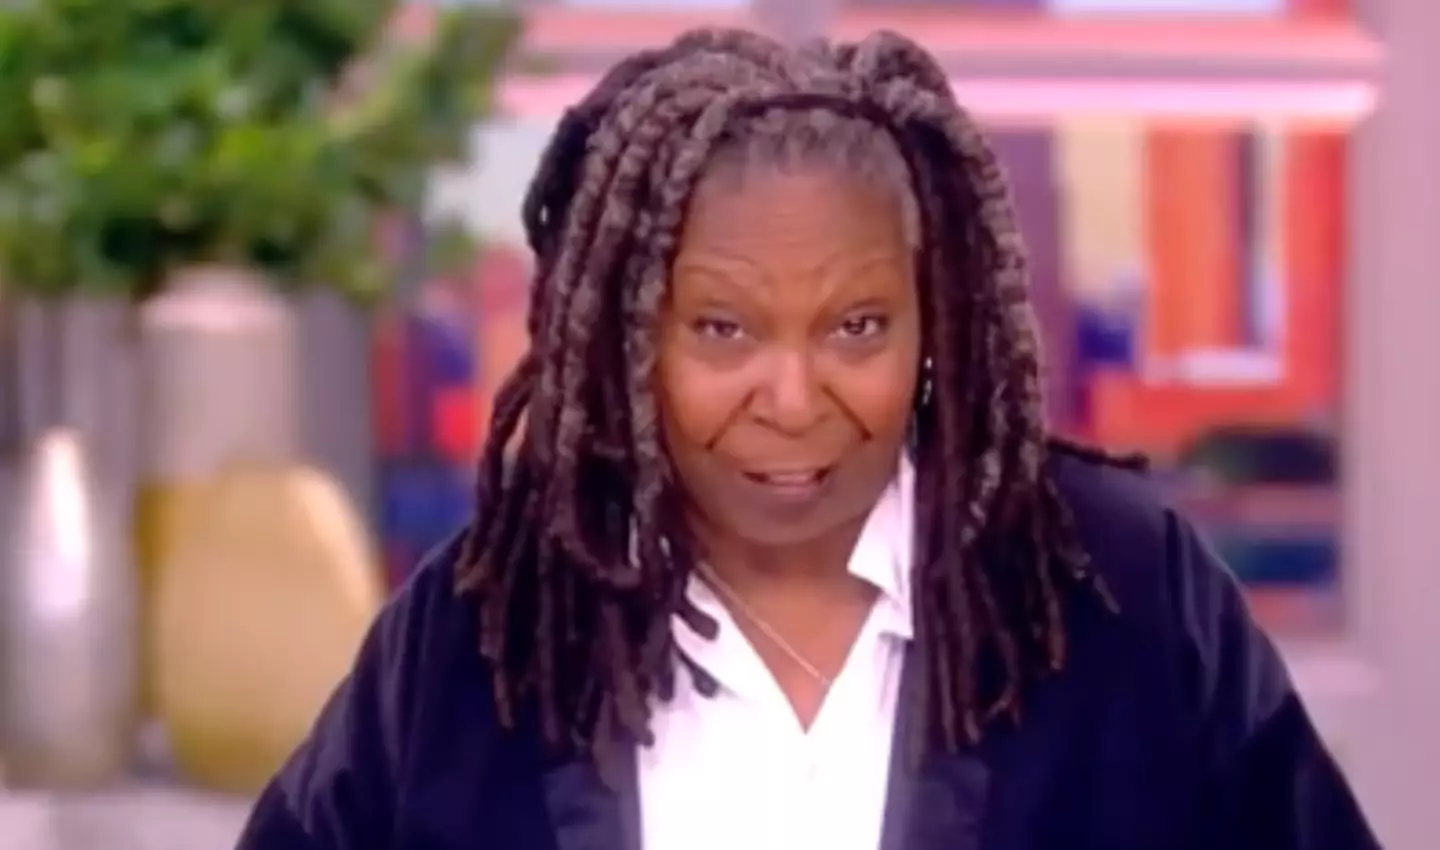 Whoopi Goldberg has been slammed for her controversial comments.